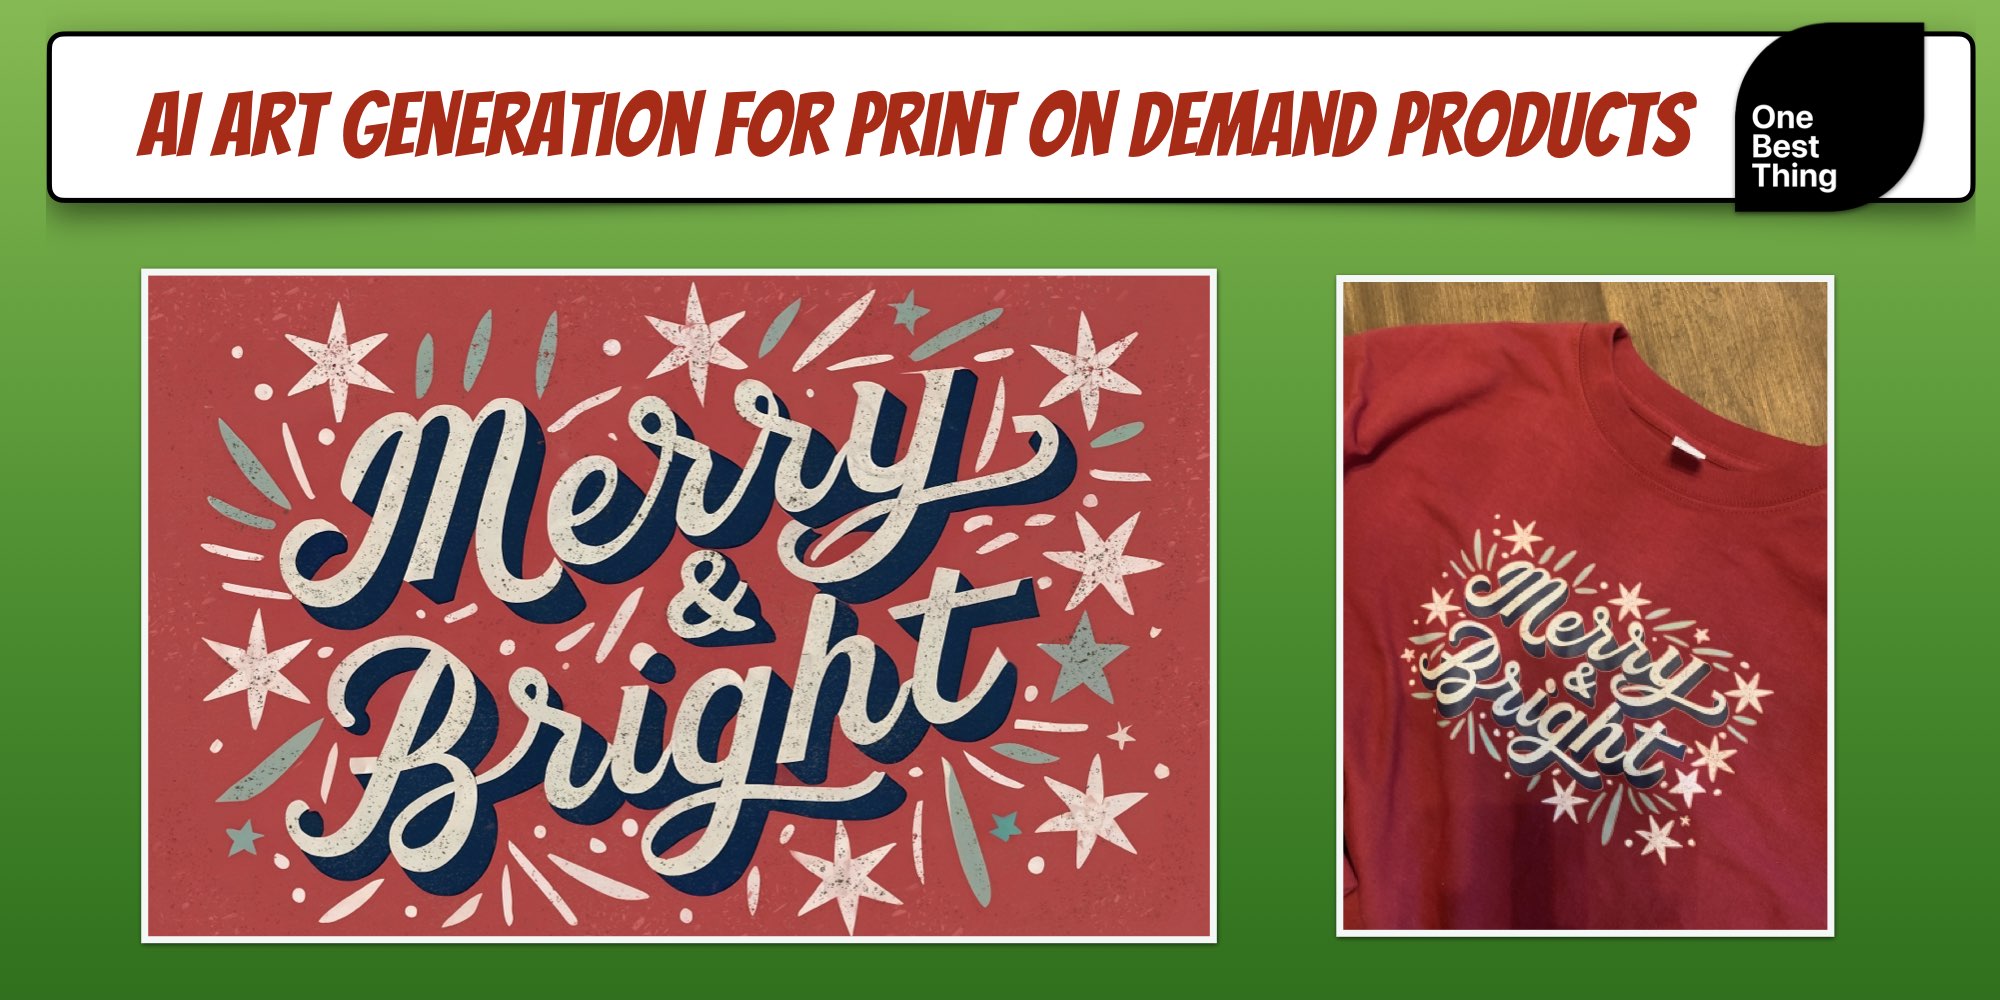 AI Art Generation for Print on Demand Products image with a logo saying "Merry and Bright" on a t shirt